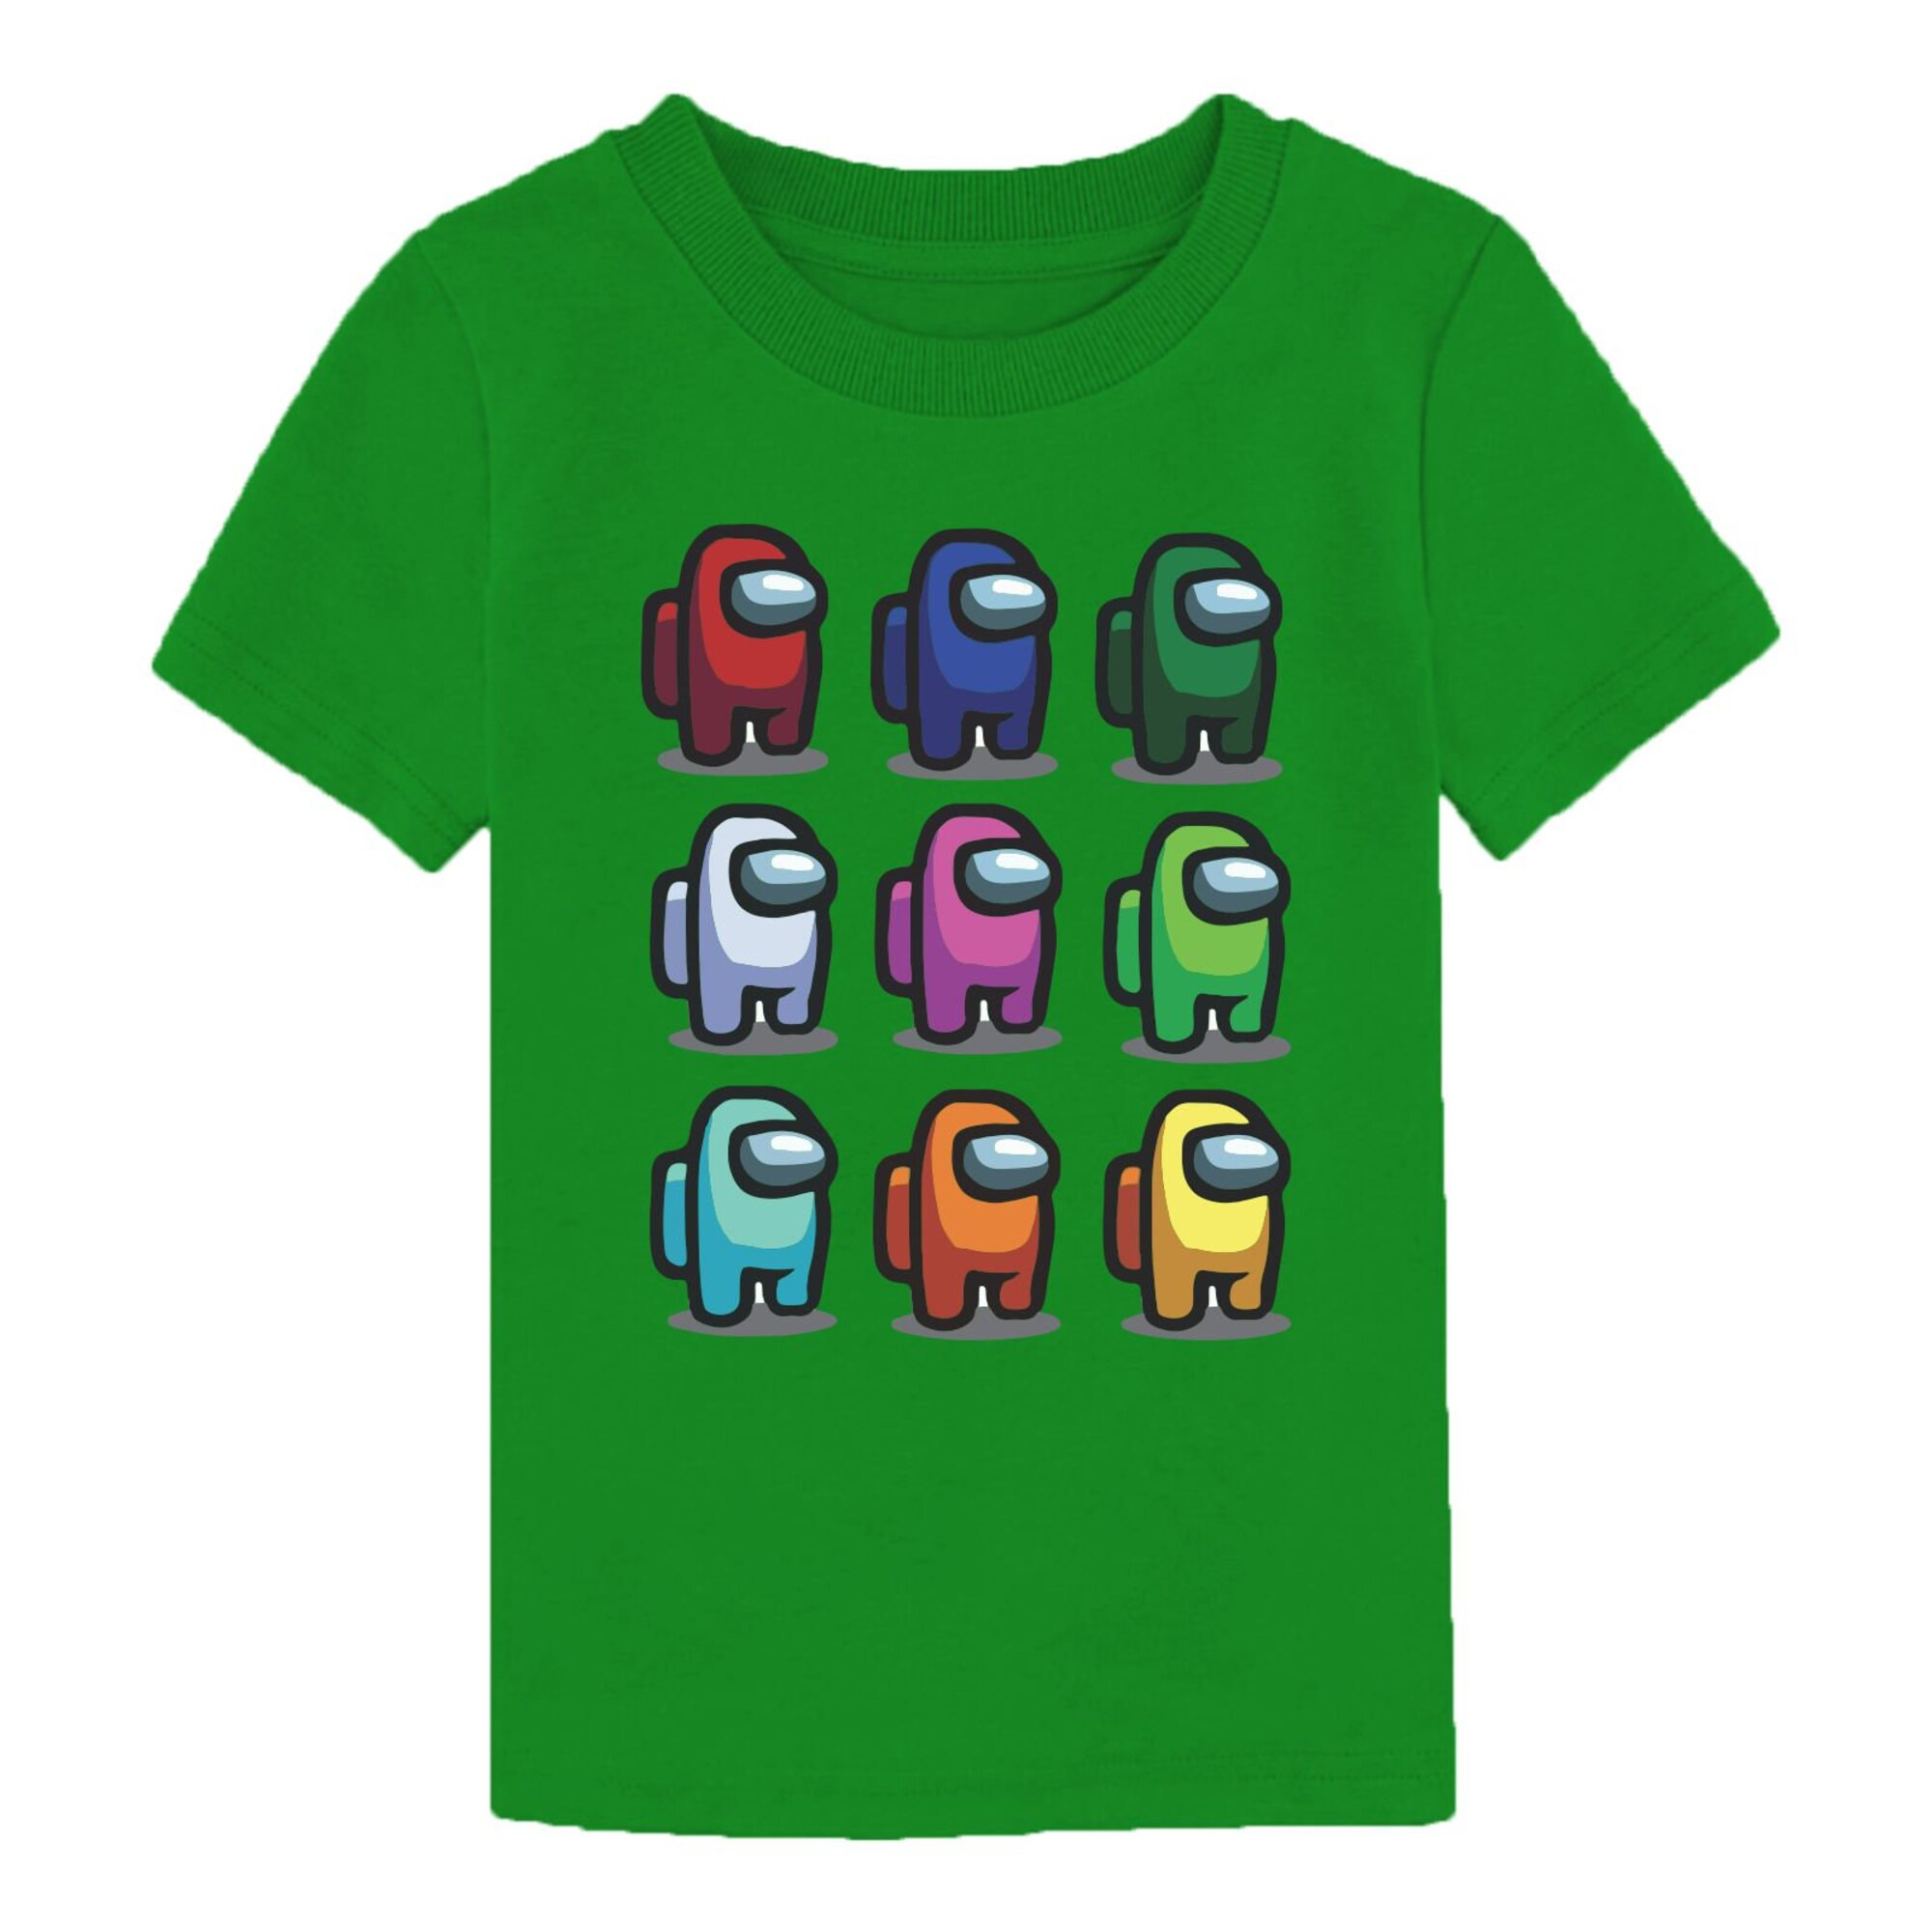 Discover Crewmate Gaming T Shirt Among Us Gamer Birthday Christmas Party Boys Girls Kids Top Gift